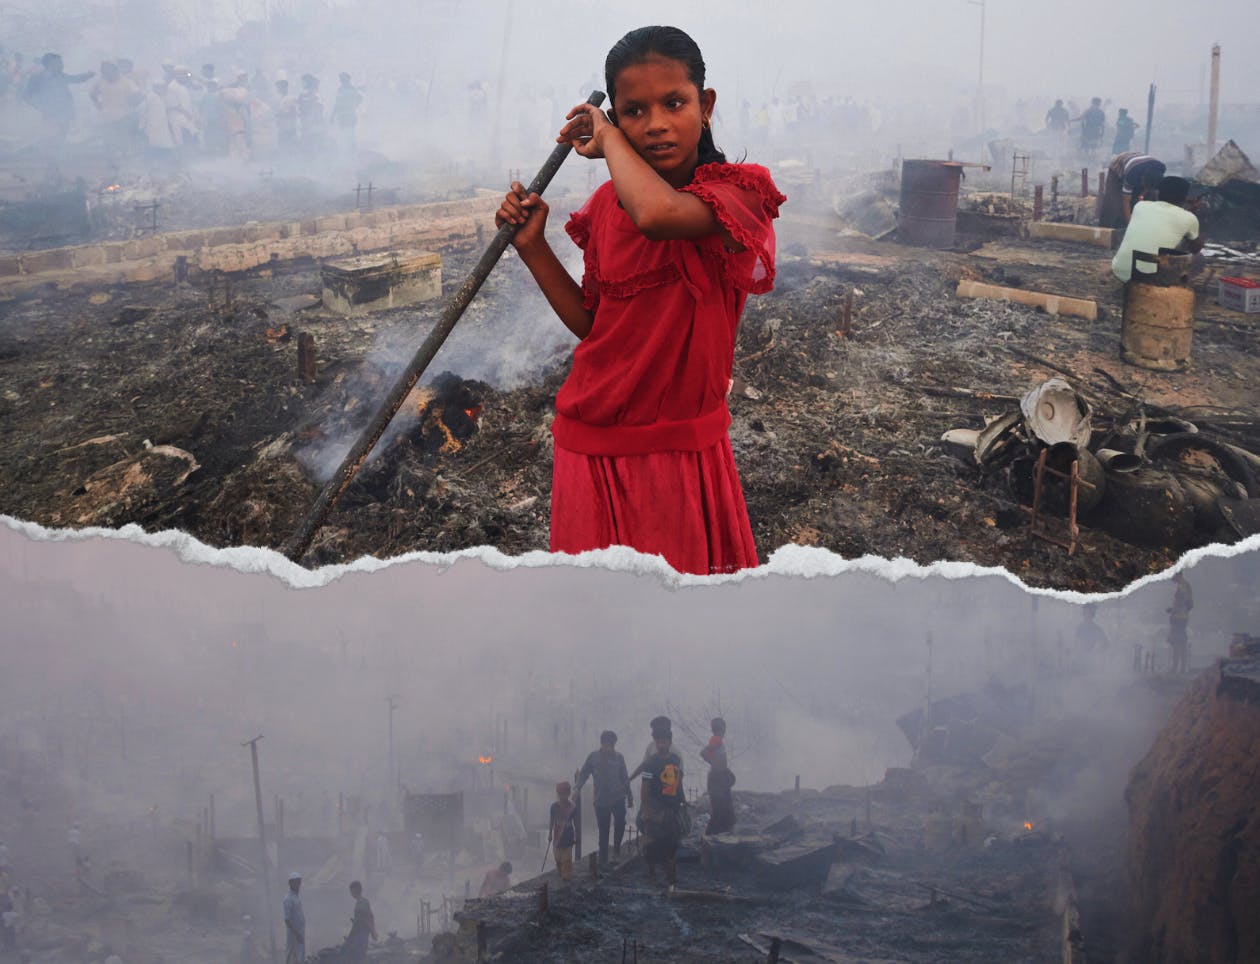 Top: A young girl stands surrounded by a house that has been burnt down from a natural disaster. Bottom: young boys walk through smoke during the wreckage of a natural disaster. 